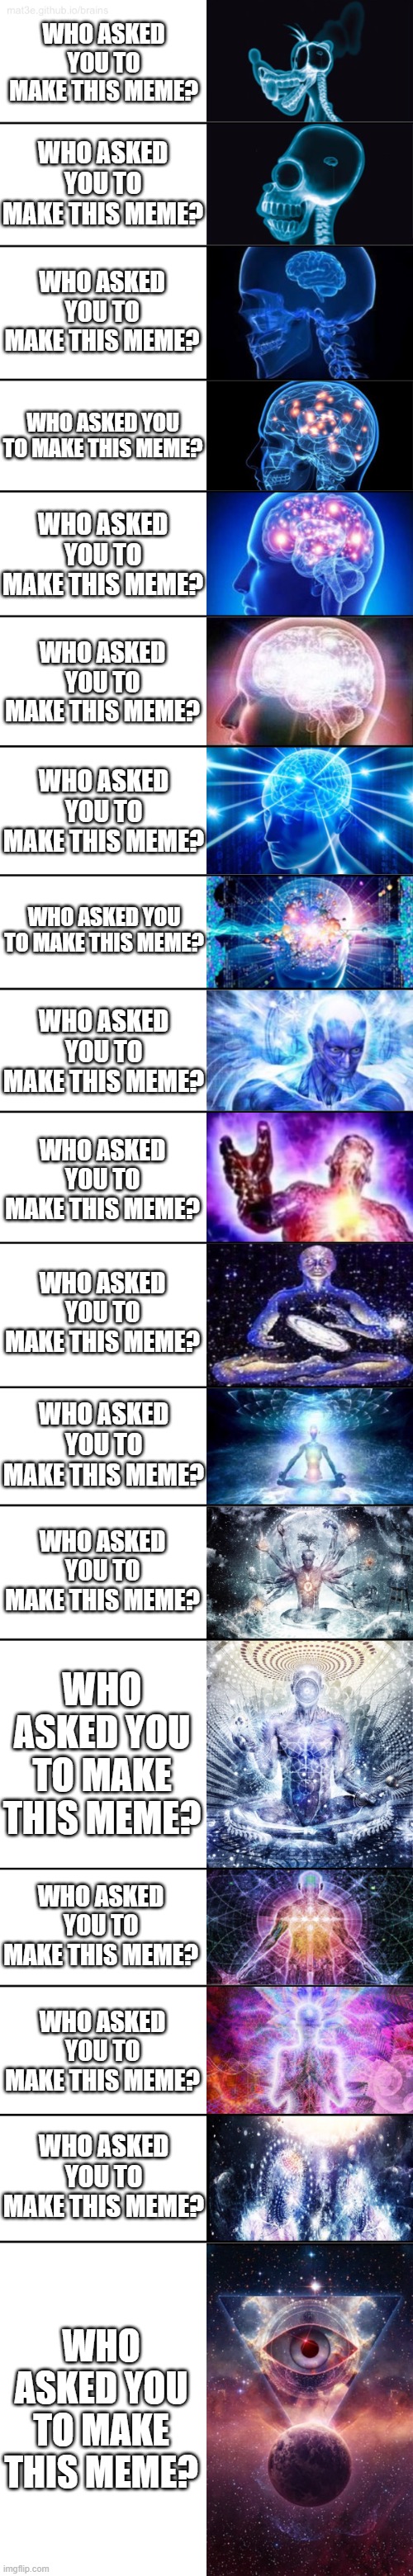 Expanding Brain 18 Panels | WHO ASKED YOU TO MAKE THIS MEME? WHO ASKED YOU TO MAKE THIS MEME? WHO ASKED YOU TO MAKE THIS MEME? WHO ASKED YOU TO MAKE THIS MEME? WHO ASKE | image tagged in expanding brain 18 panels | made w/ Imgflip meme maker